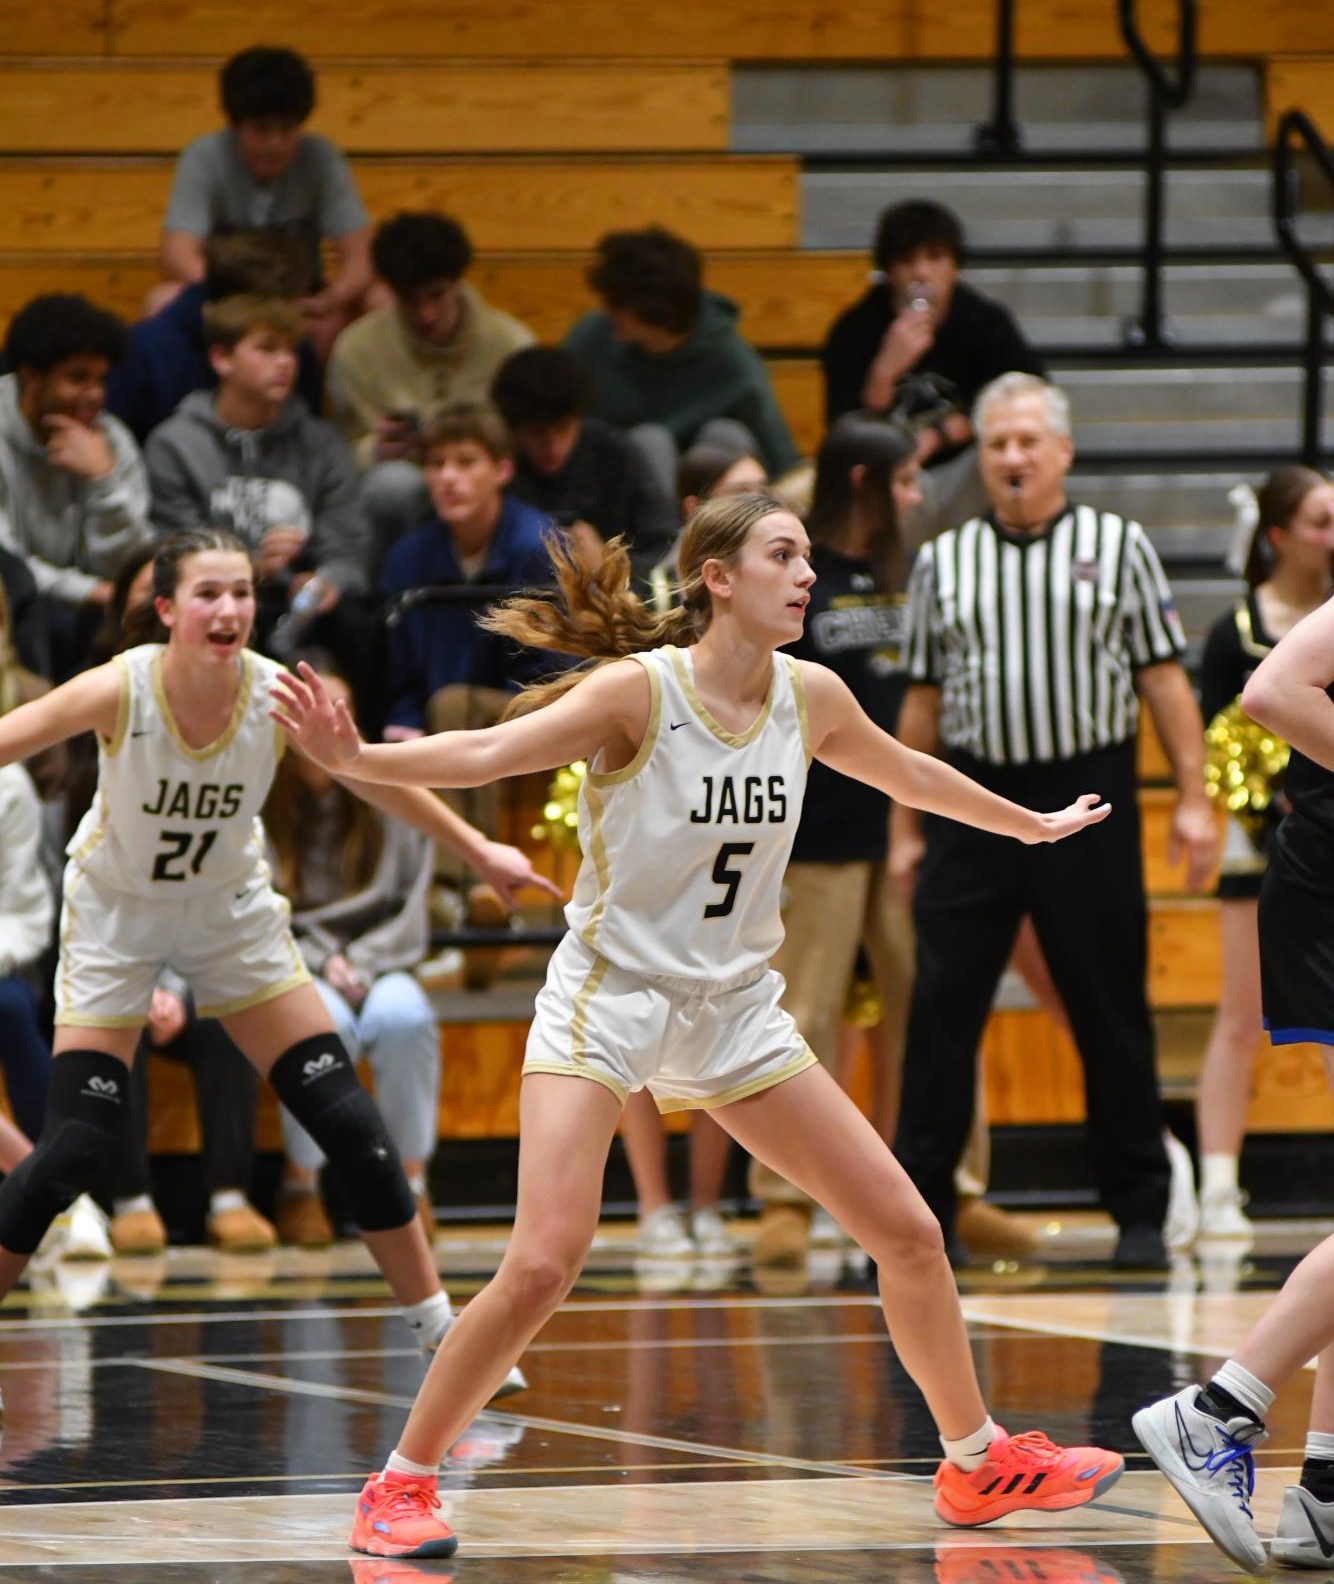 Forward Kate Fehr ‘24 and guard Alyssa Goode ‘25 play defense against the Falcons during the fourth quarter Jan. 11. Goode scored 10 points during this game and averages 10.3 points per game, according to MaxPreps. 